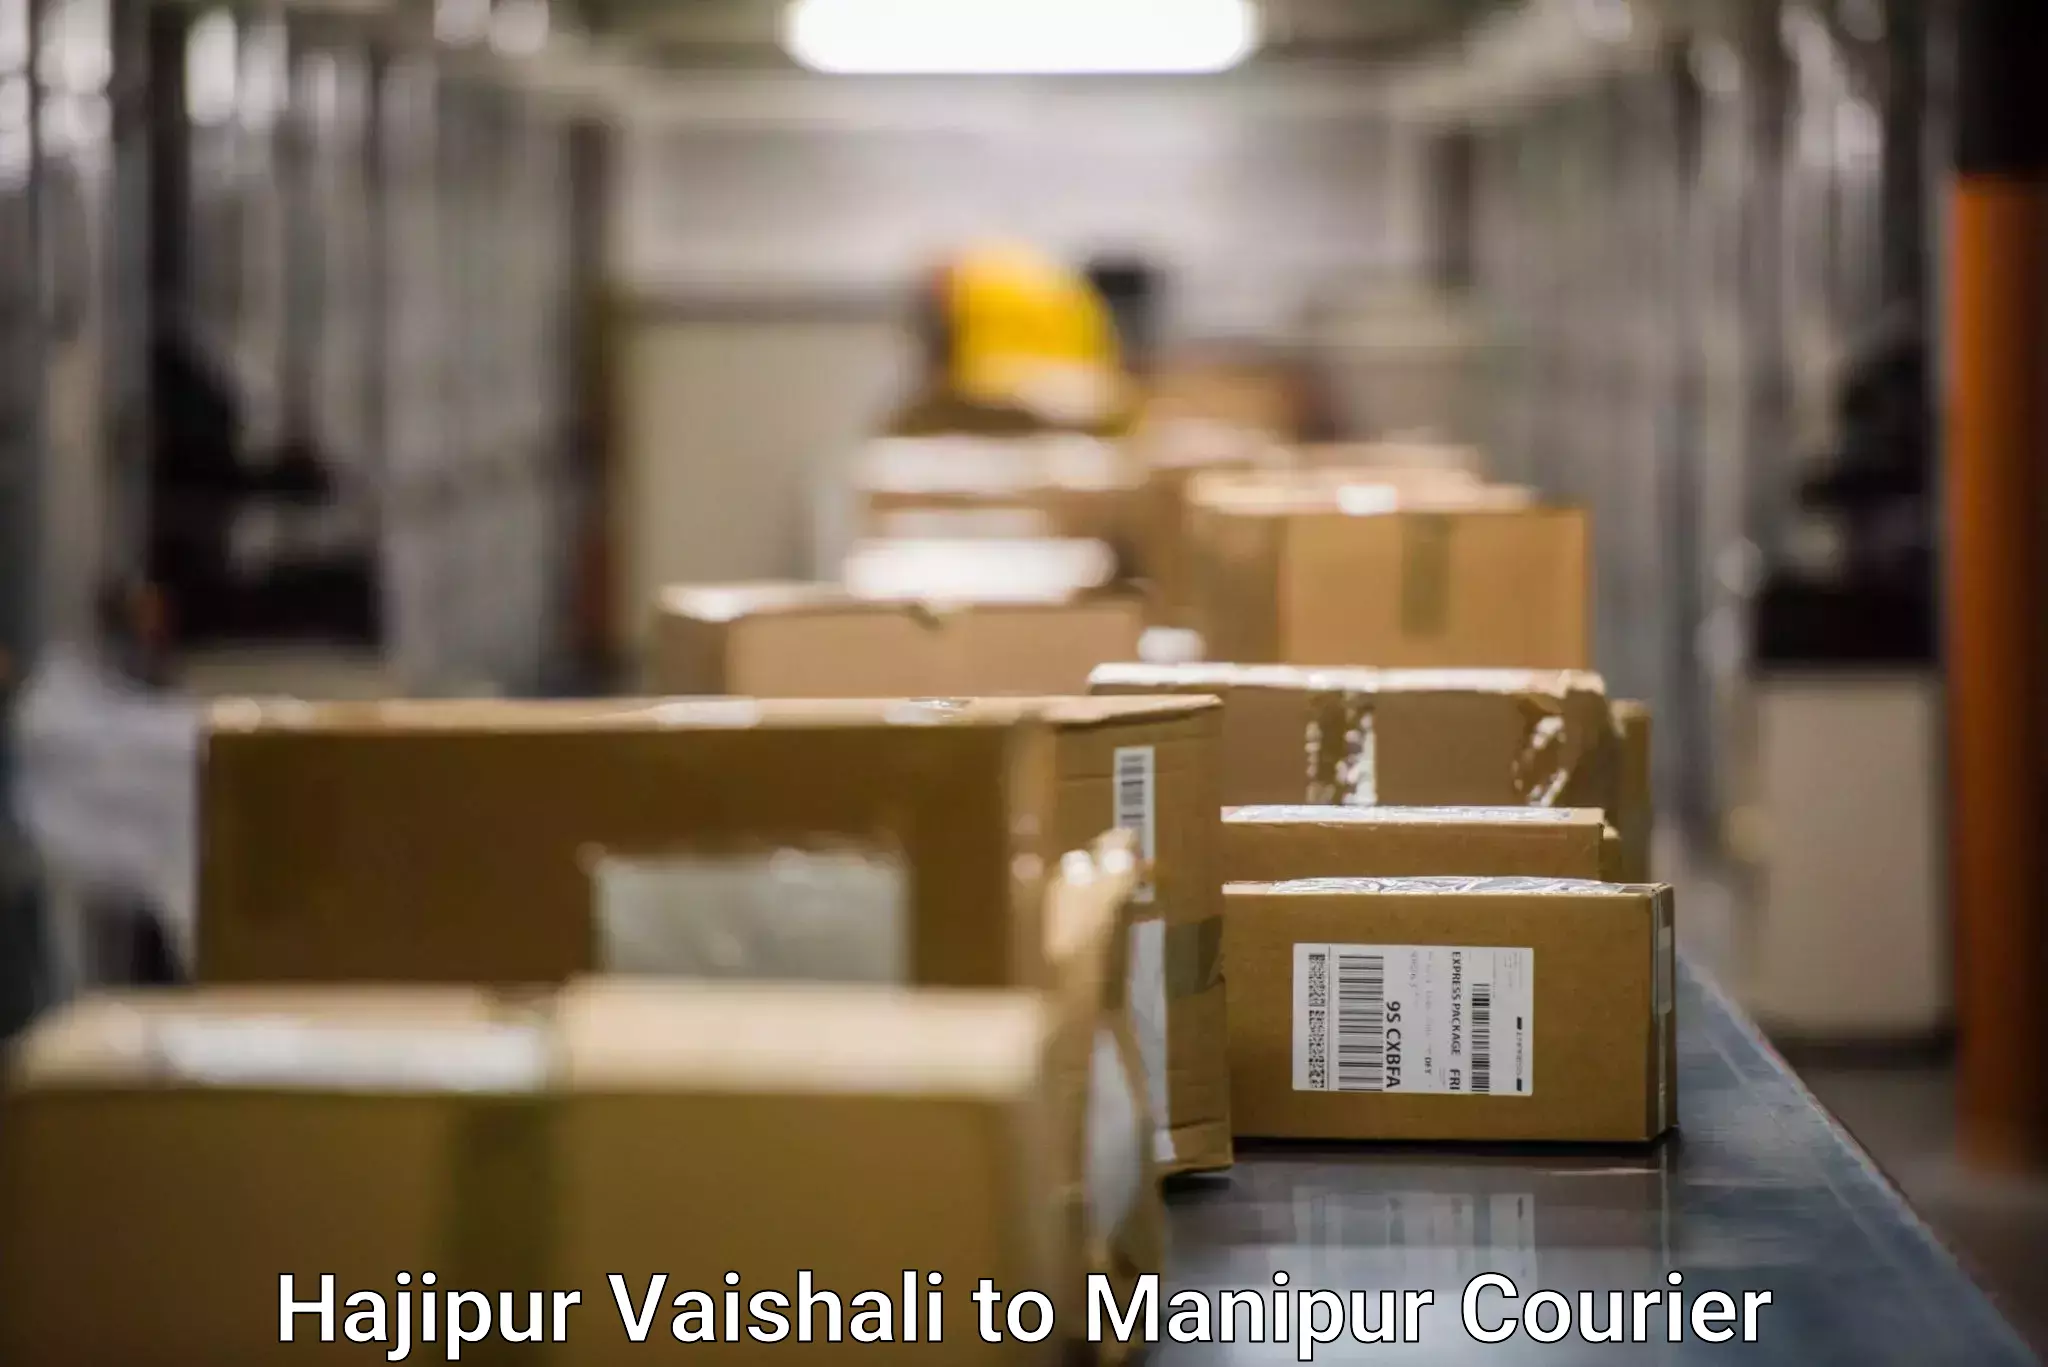 On-call courier service Hajipur Vaishali to Manipur